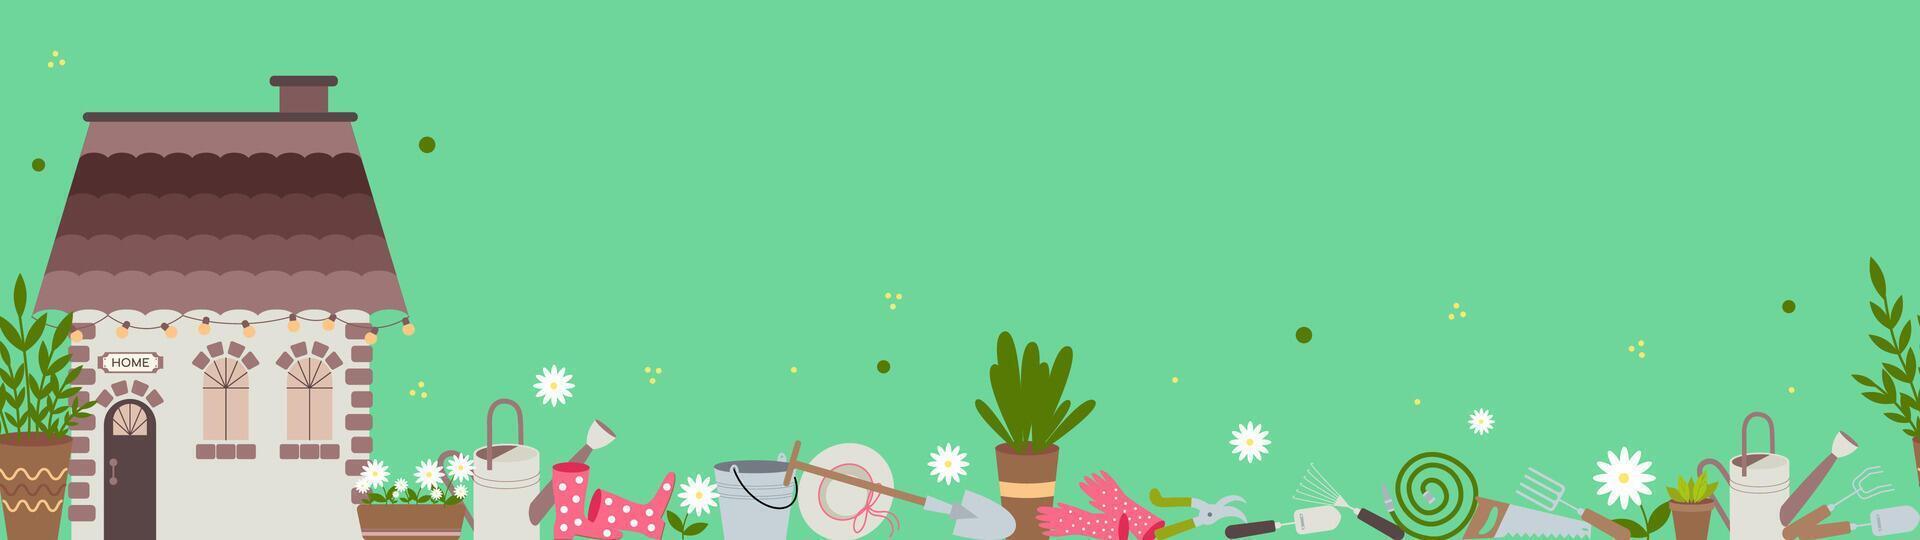 Seamless vectolong panoramic background with house and garden tools, watering can, pot with flowers, straw hat, gloves and boots, rake, shovel. vector